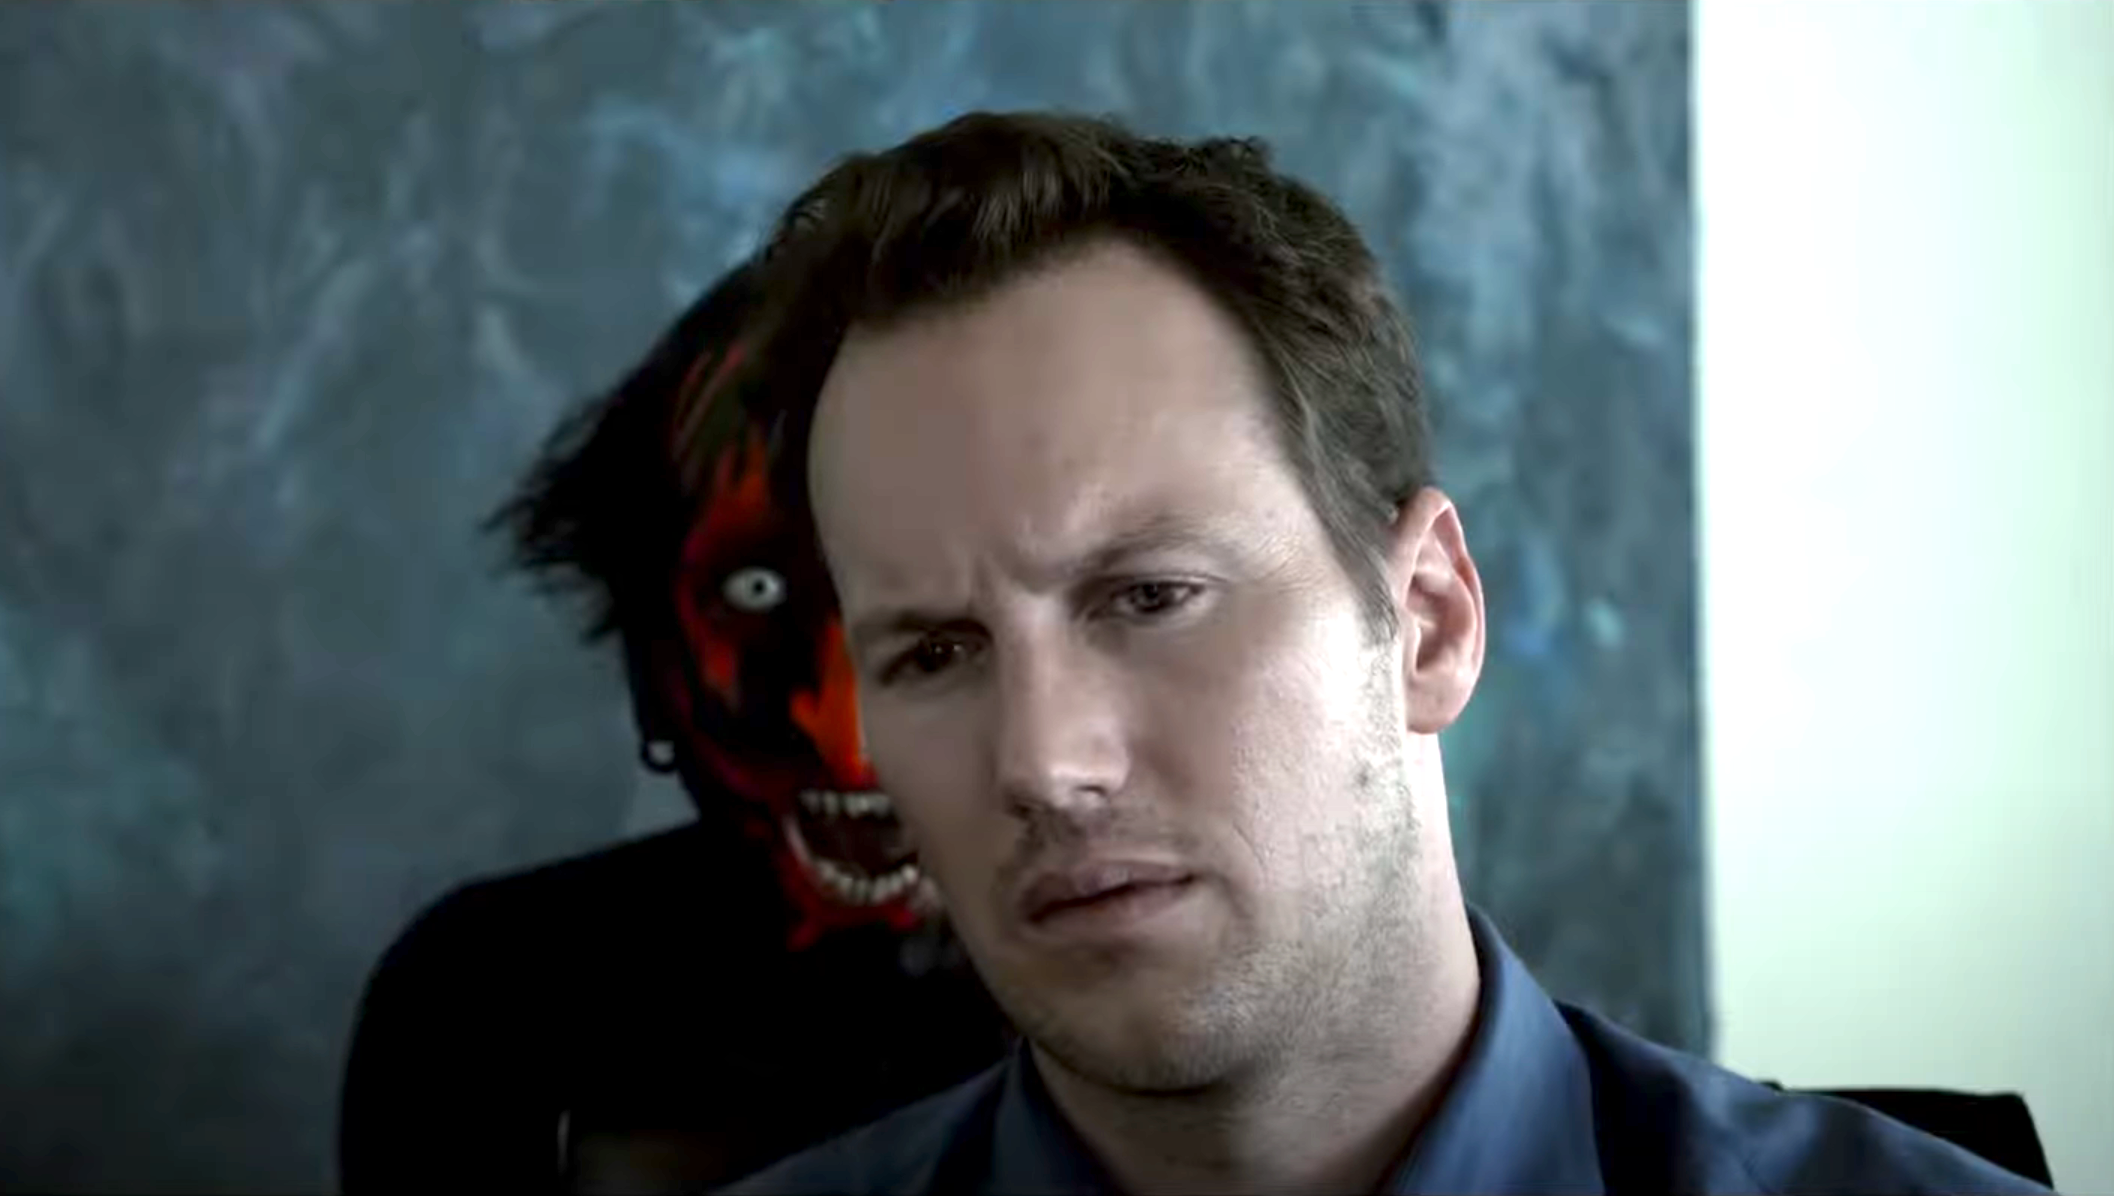 a man sitting at a table while a very scary demon has its mouth wide open behind him